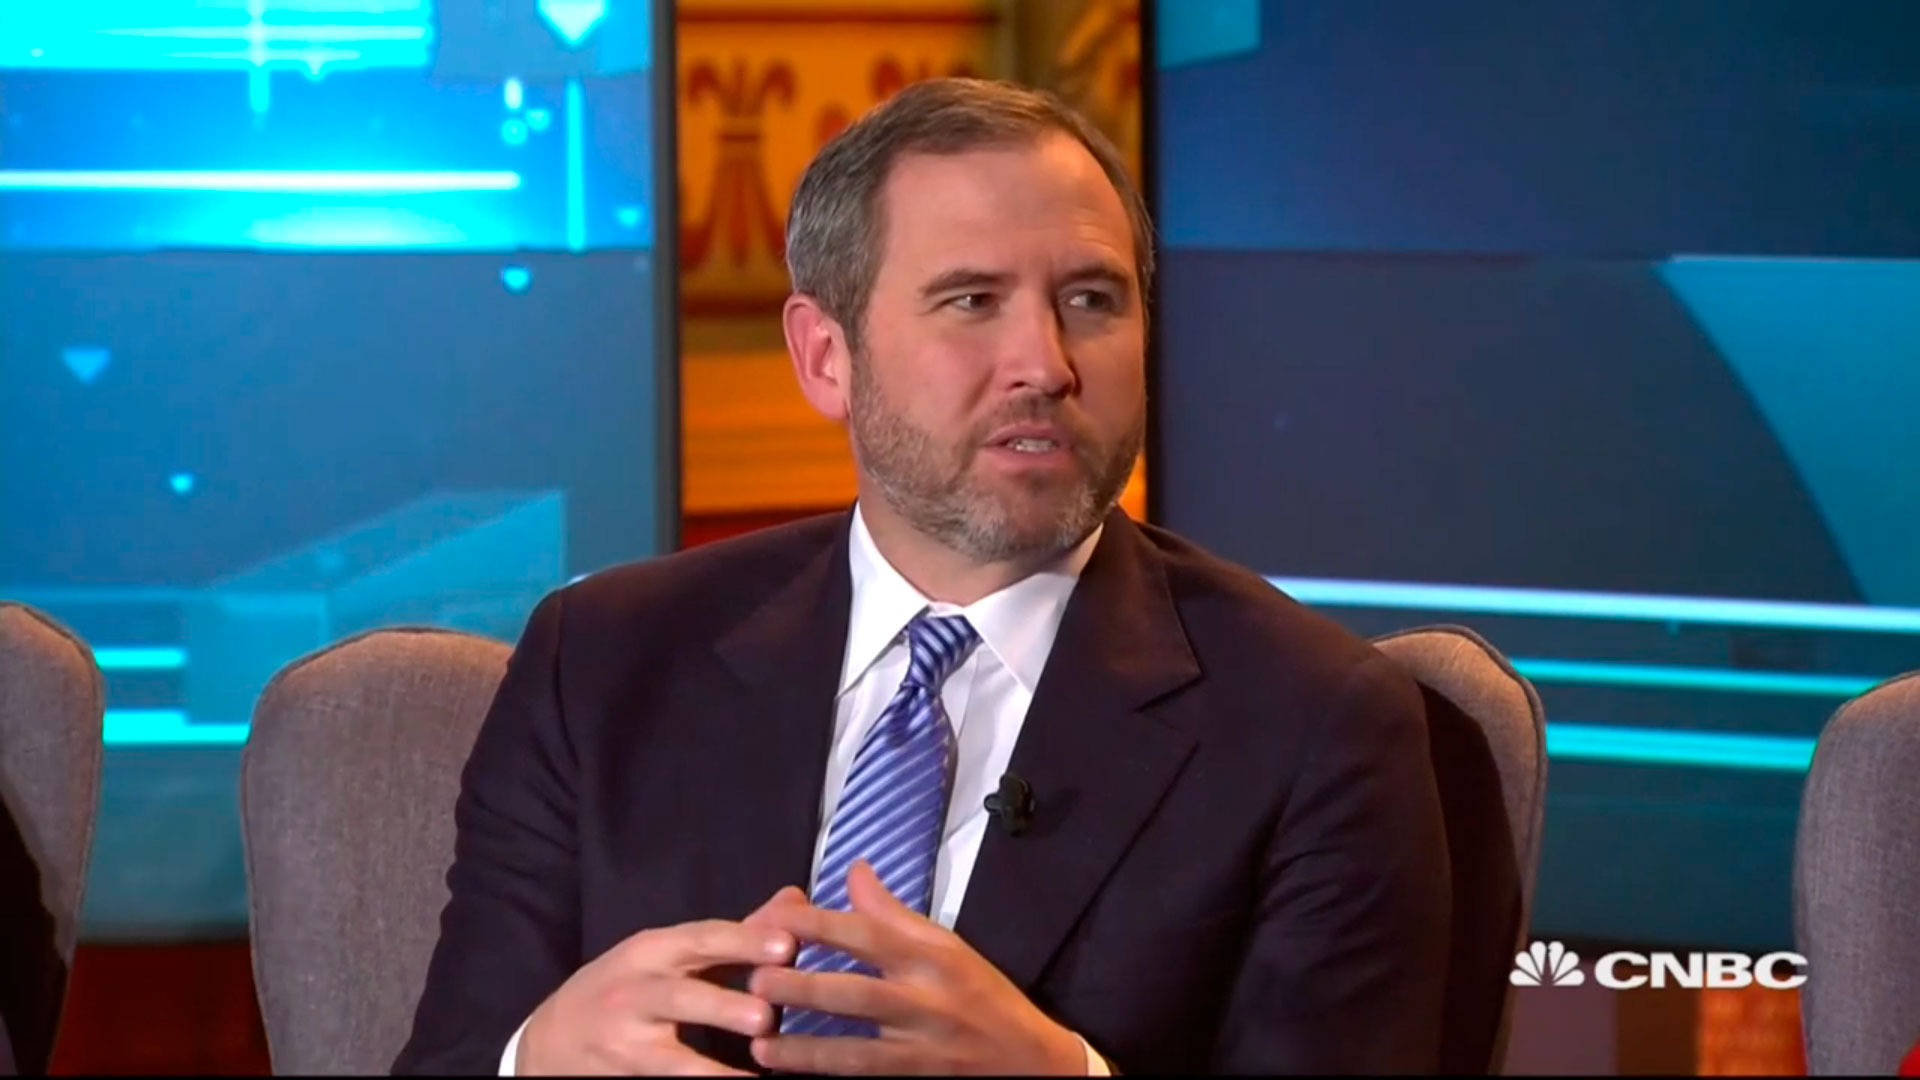 Ripple CEO: cryptocurrency could save banks $10 trillion